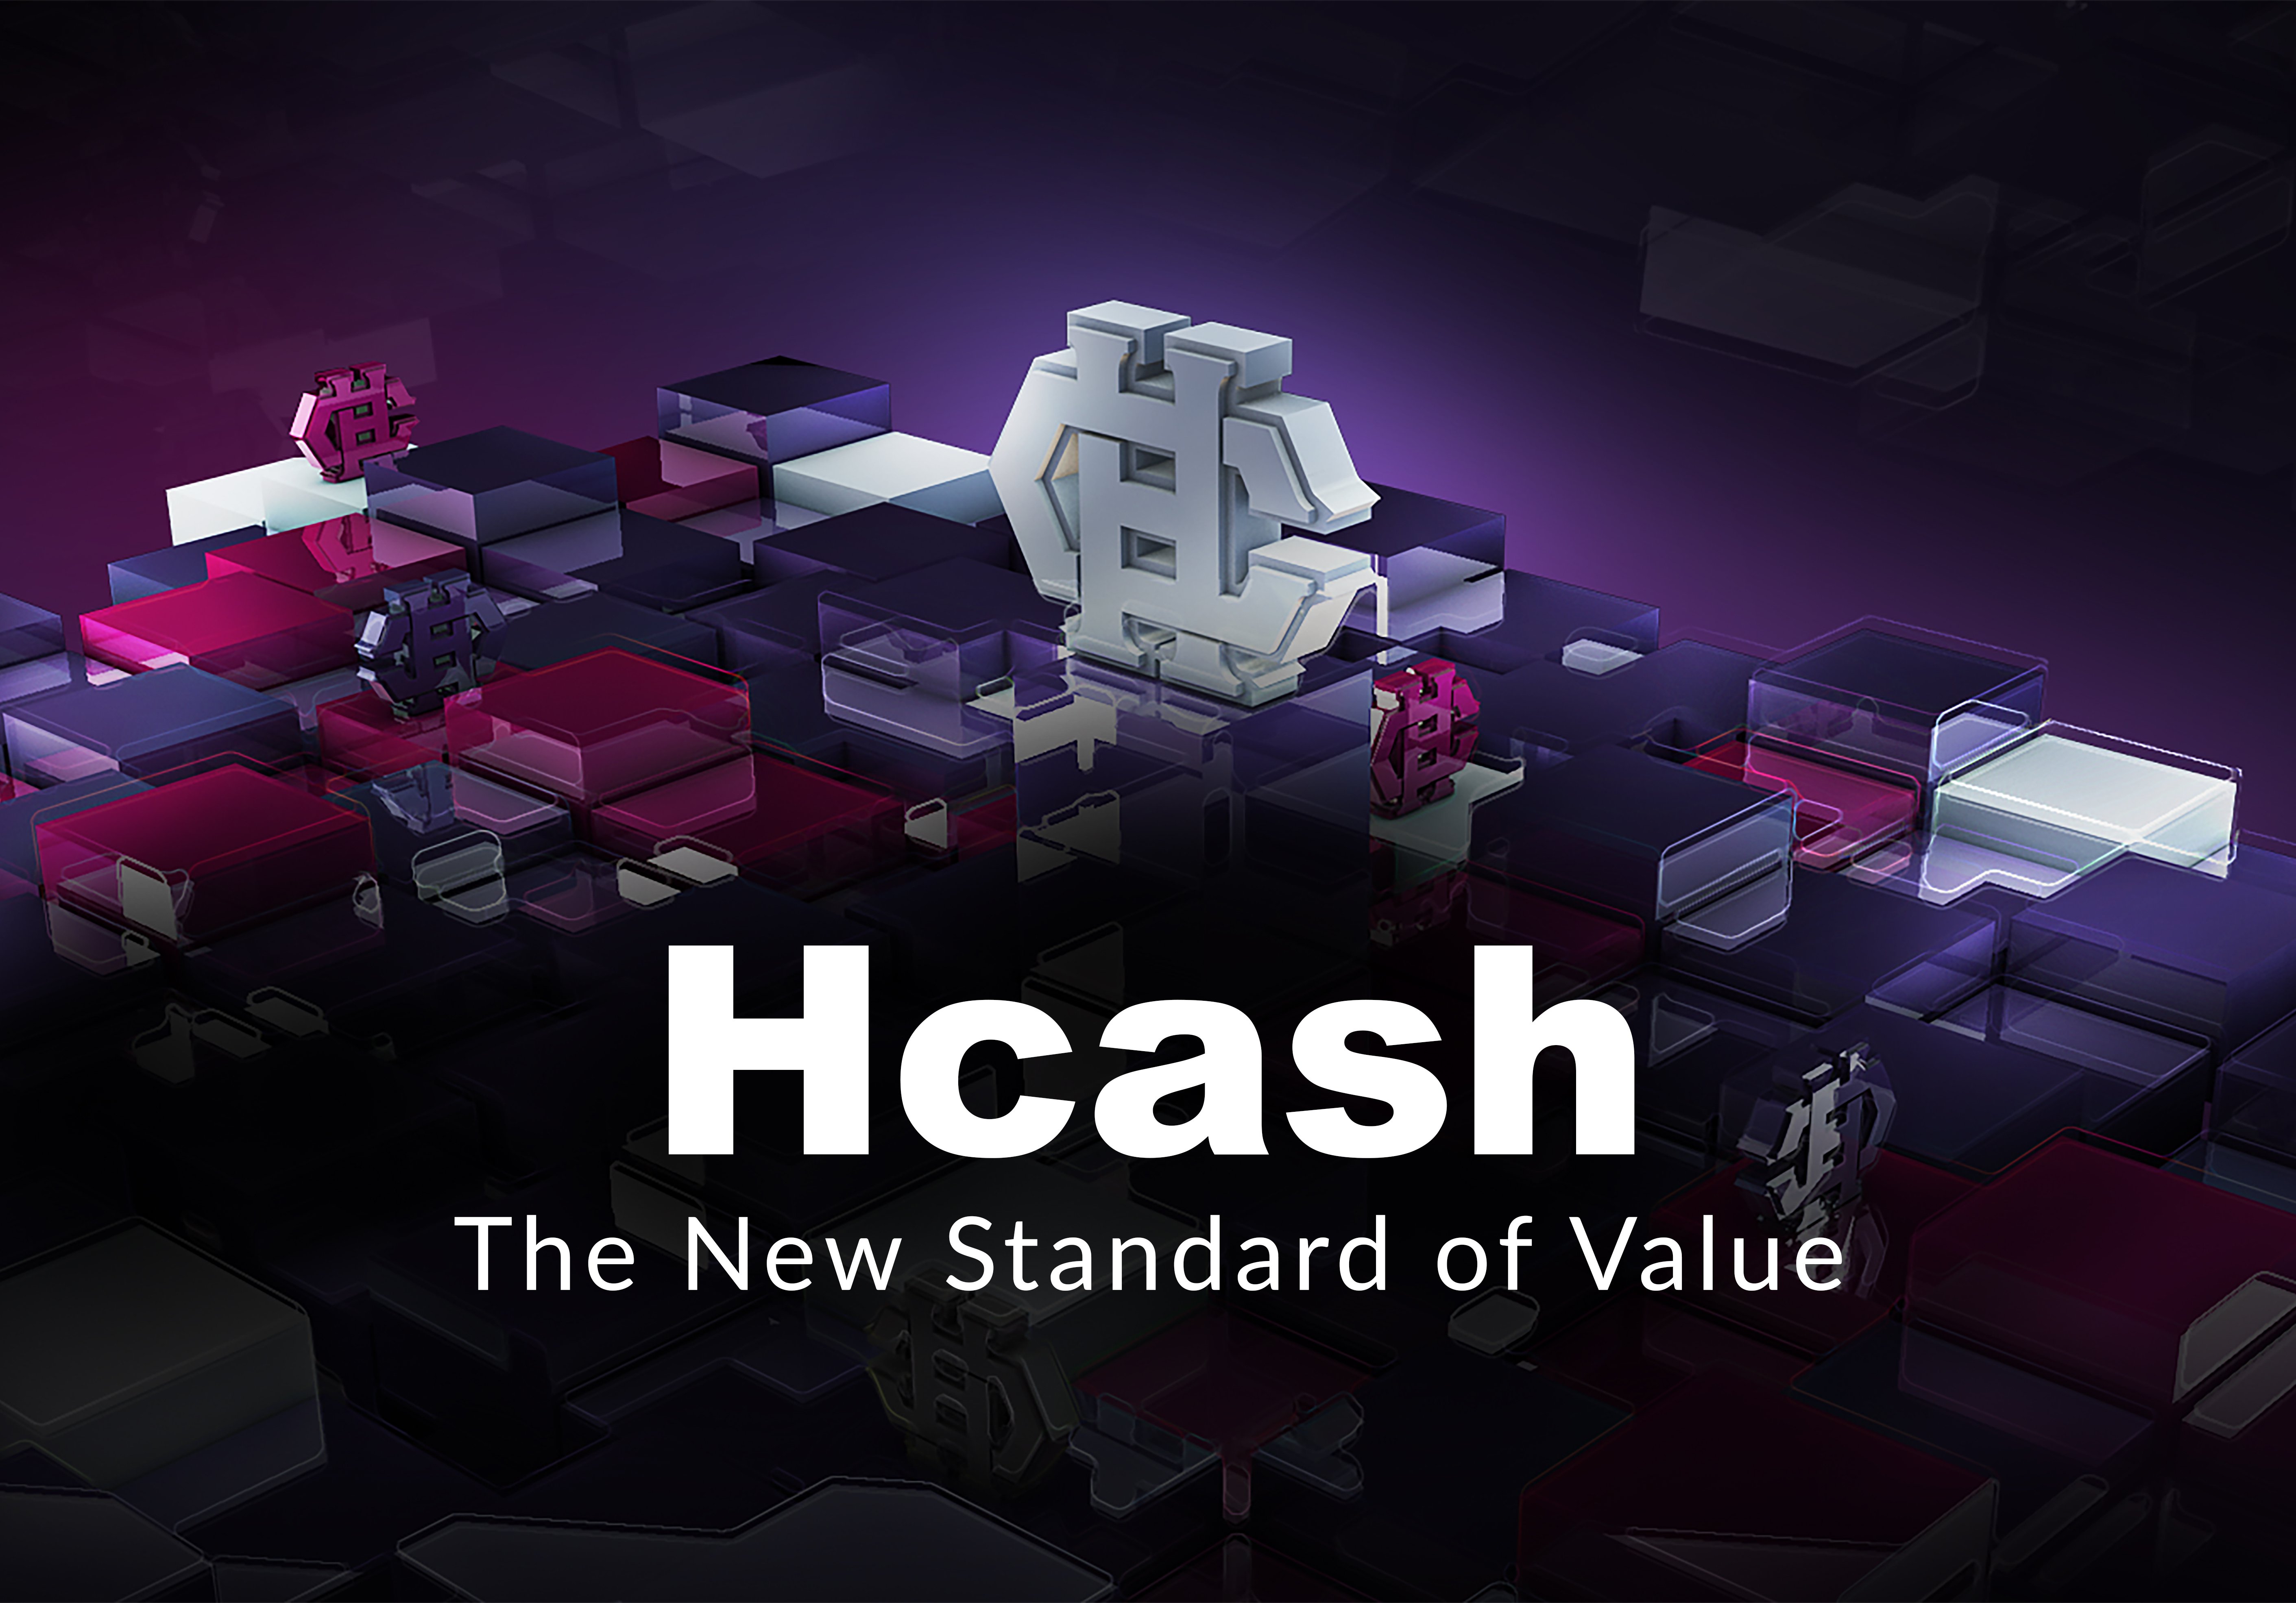 Hcash; A New Standard of Value